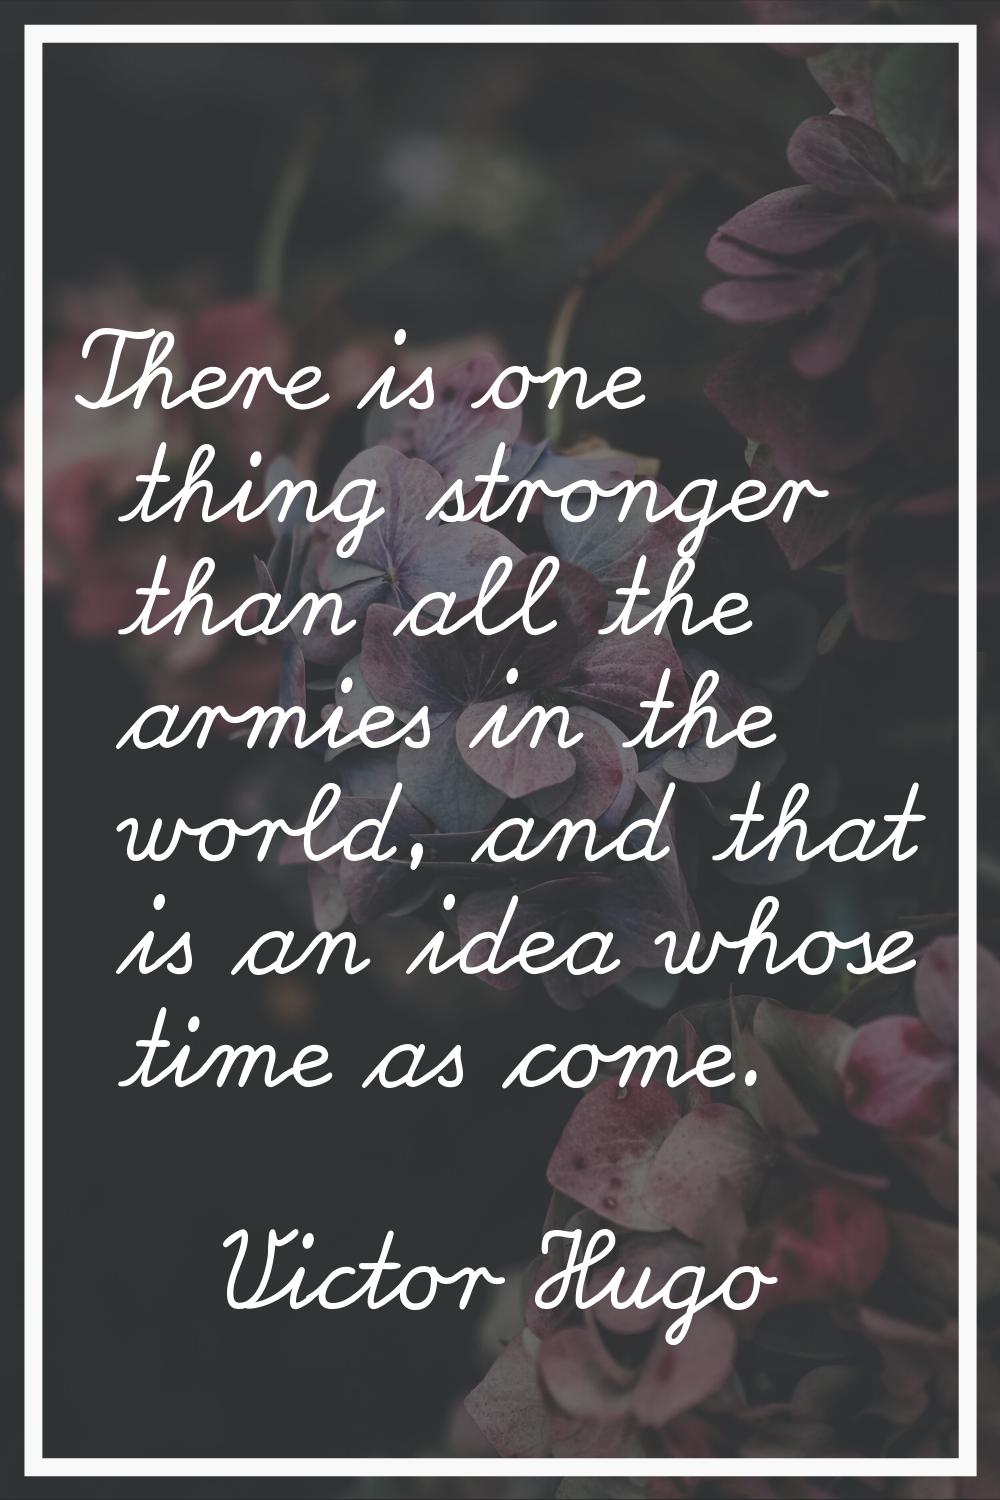 There is one thing stronger than all the armies in the world, and that is an idea whose time as com